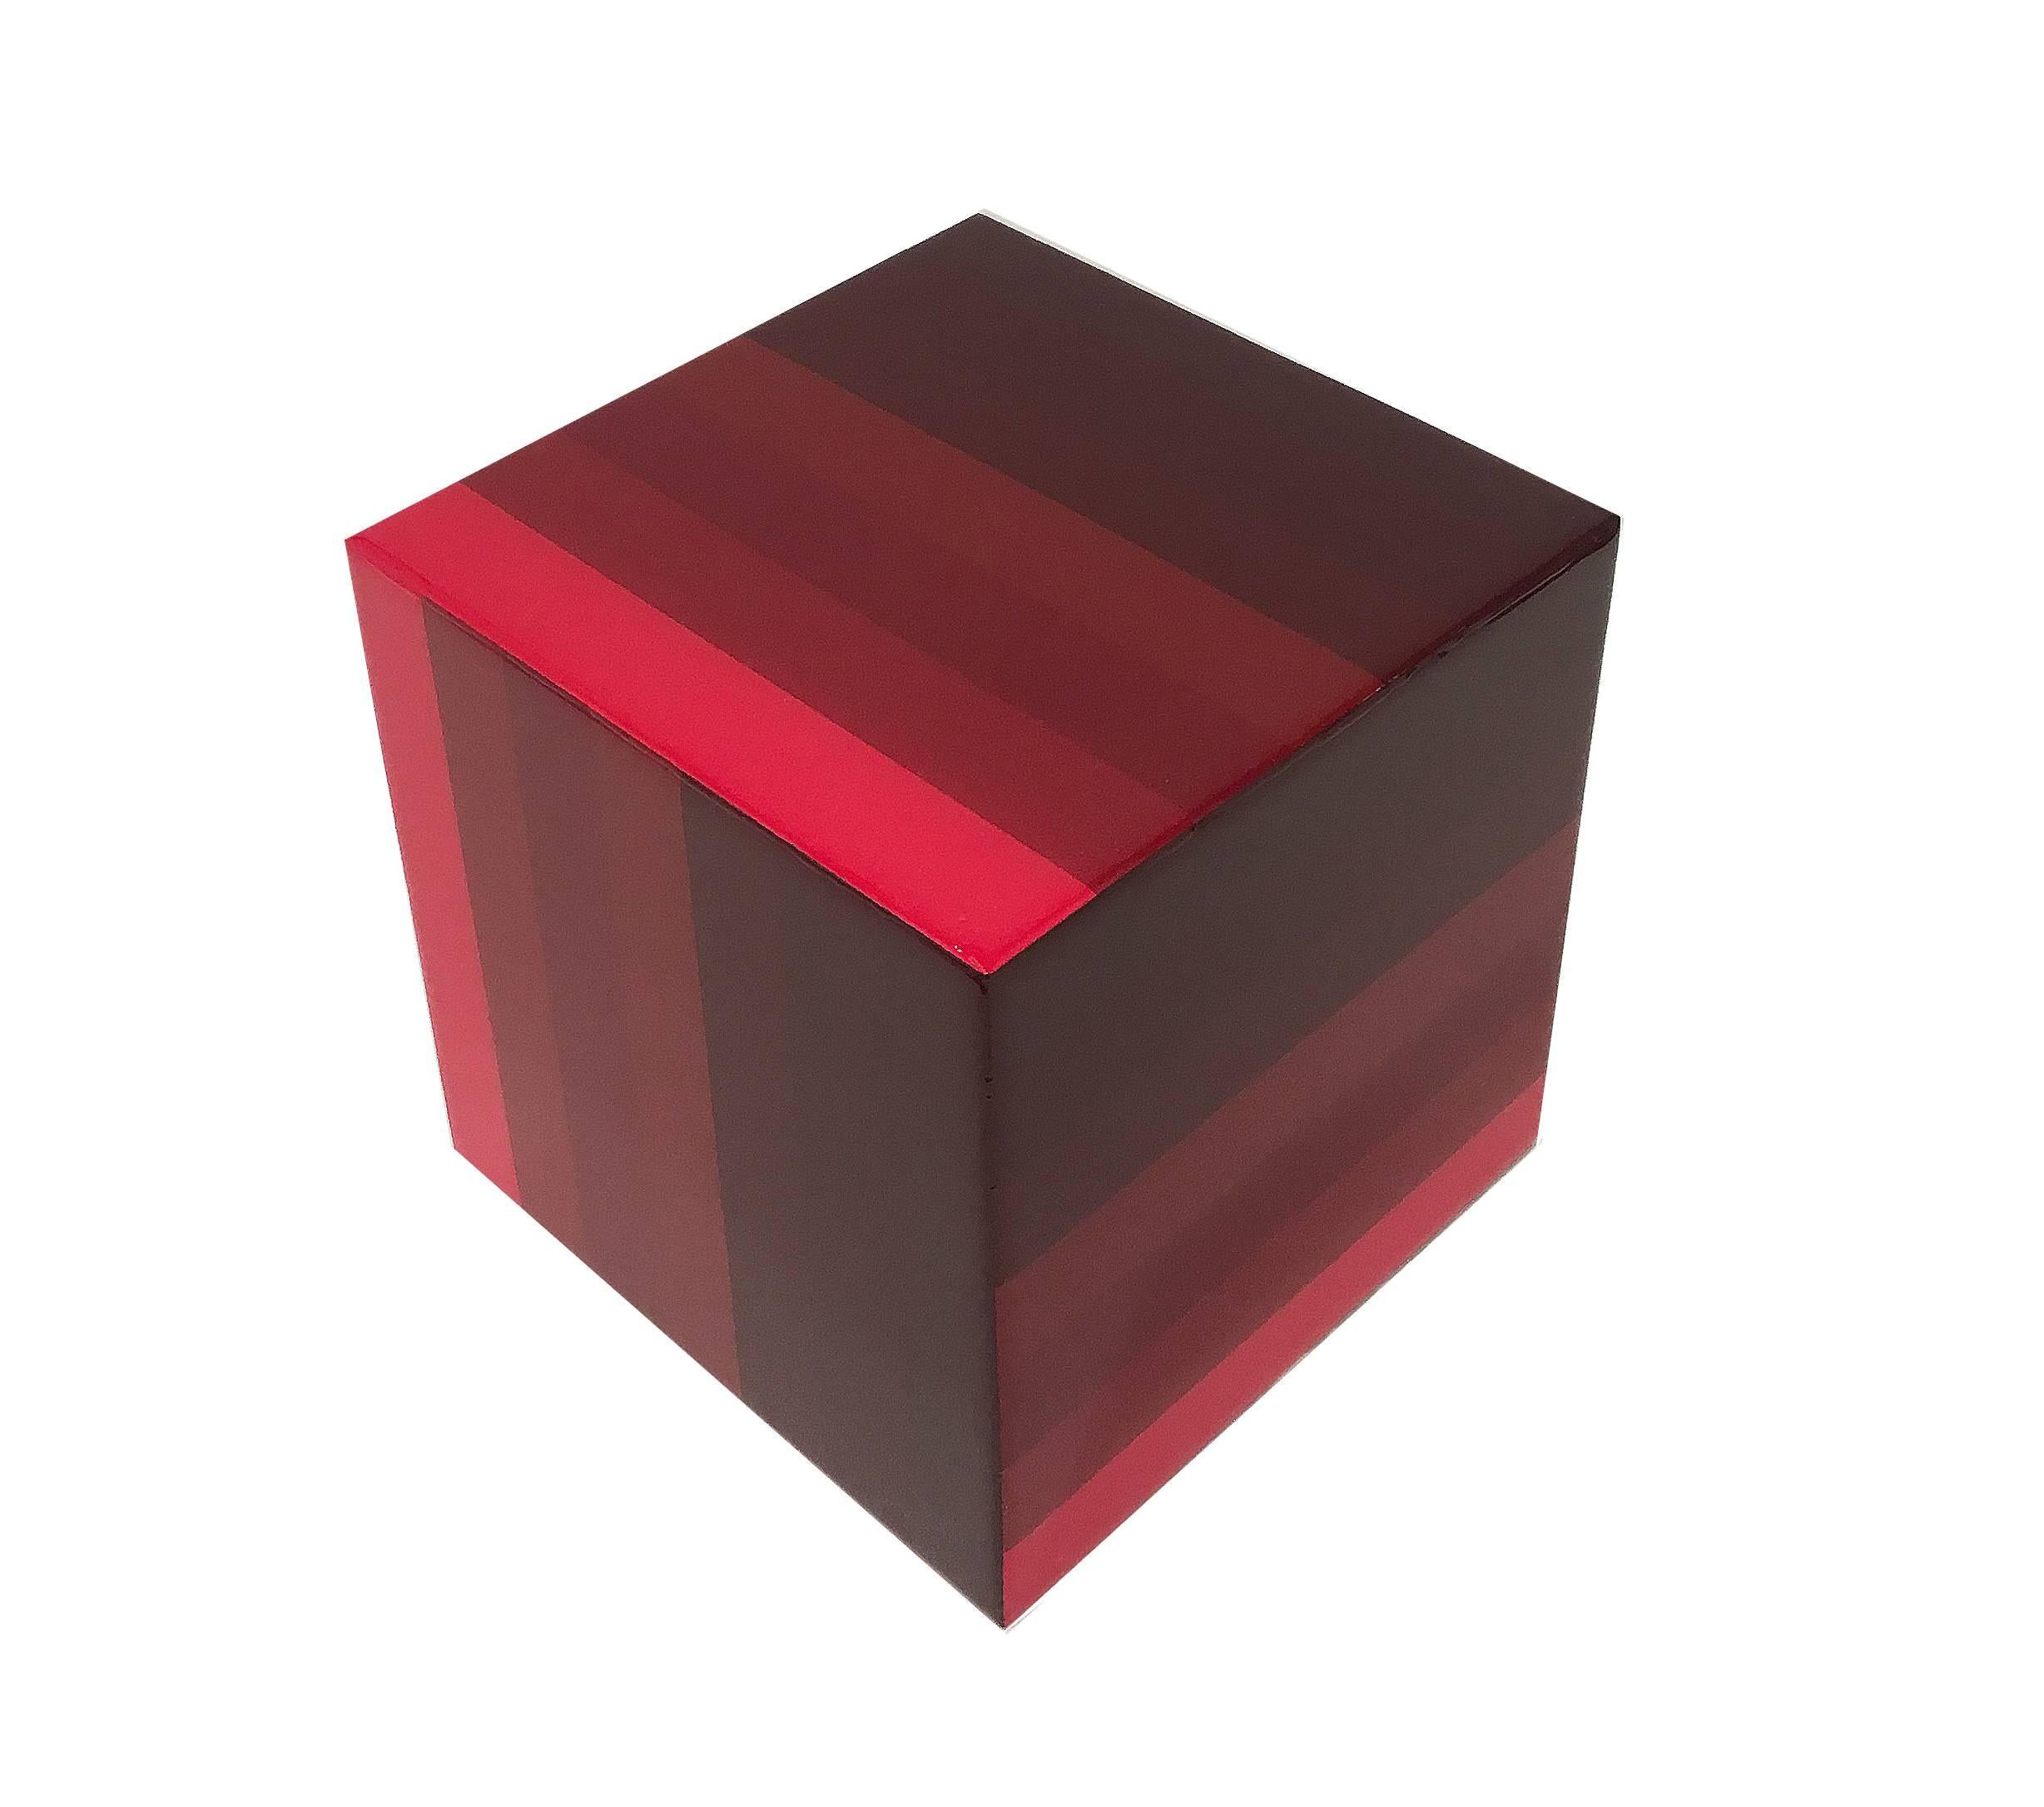 Heidi Spector Abstract Sculpture - Red Cube